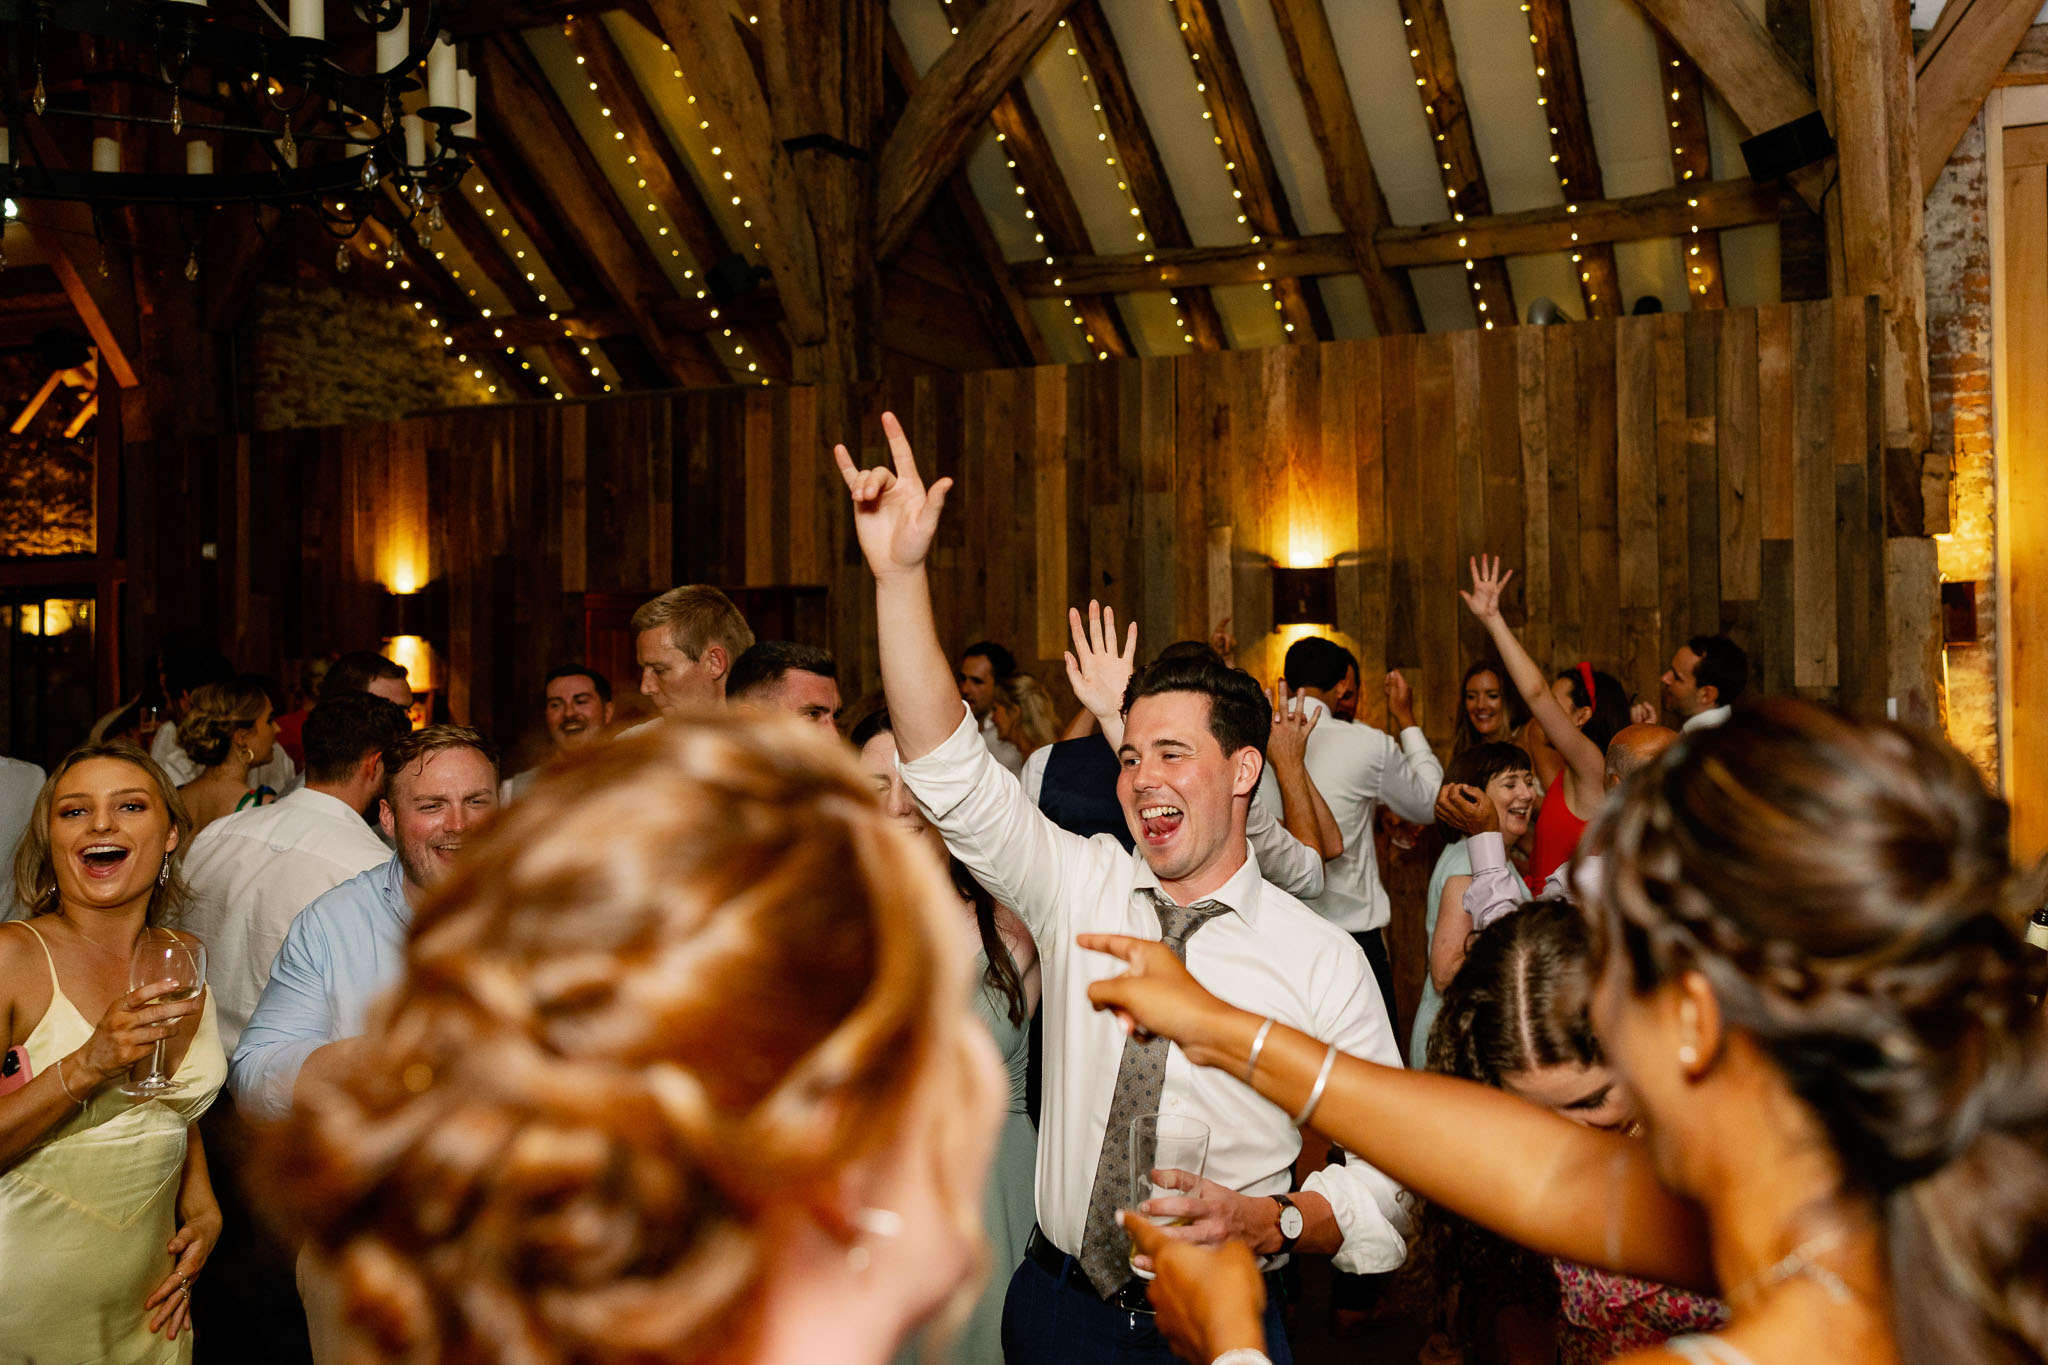 Fun and colourful wedding dancing pictures in a barn Wedding venue 